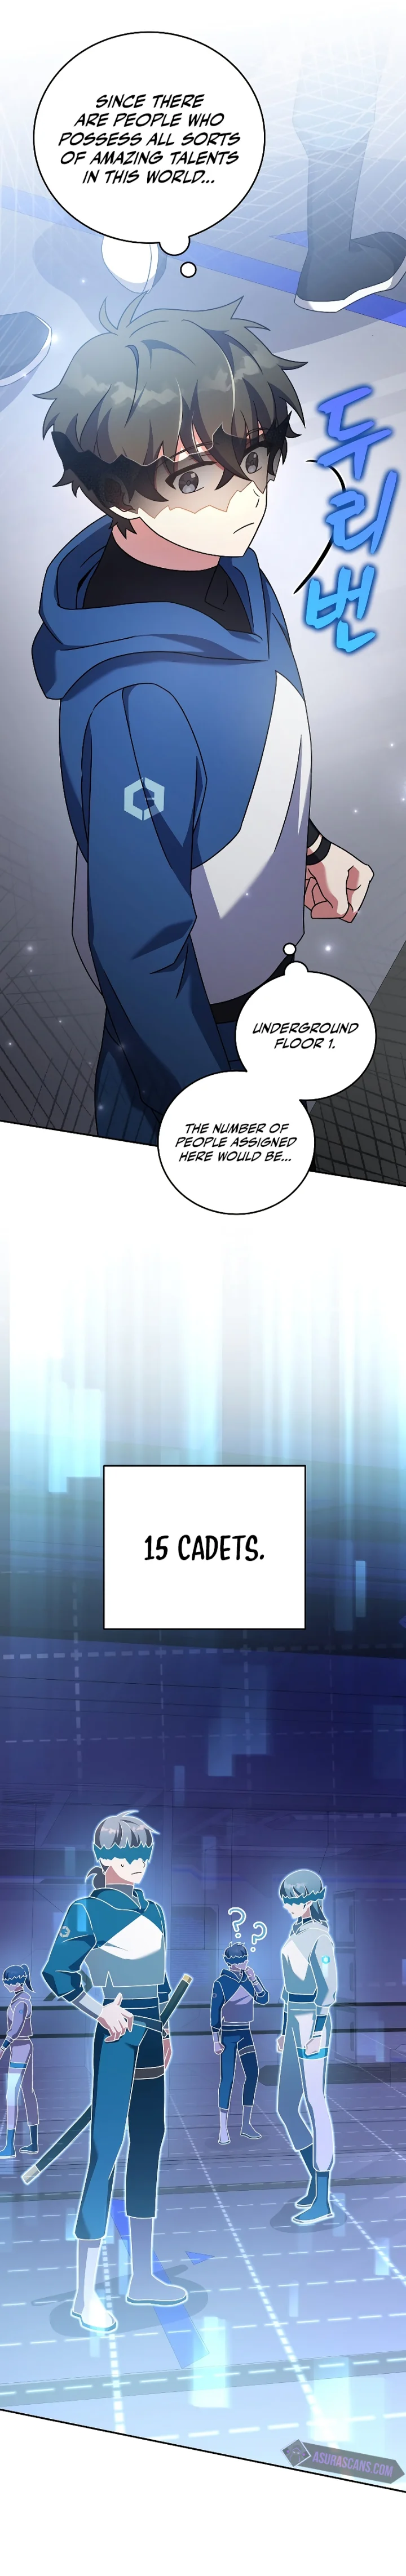 The Novel’s Extra (Remake) - Chapter 92 Page 7